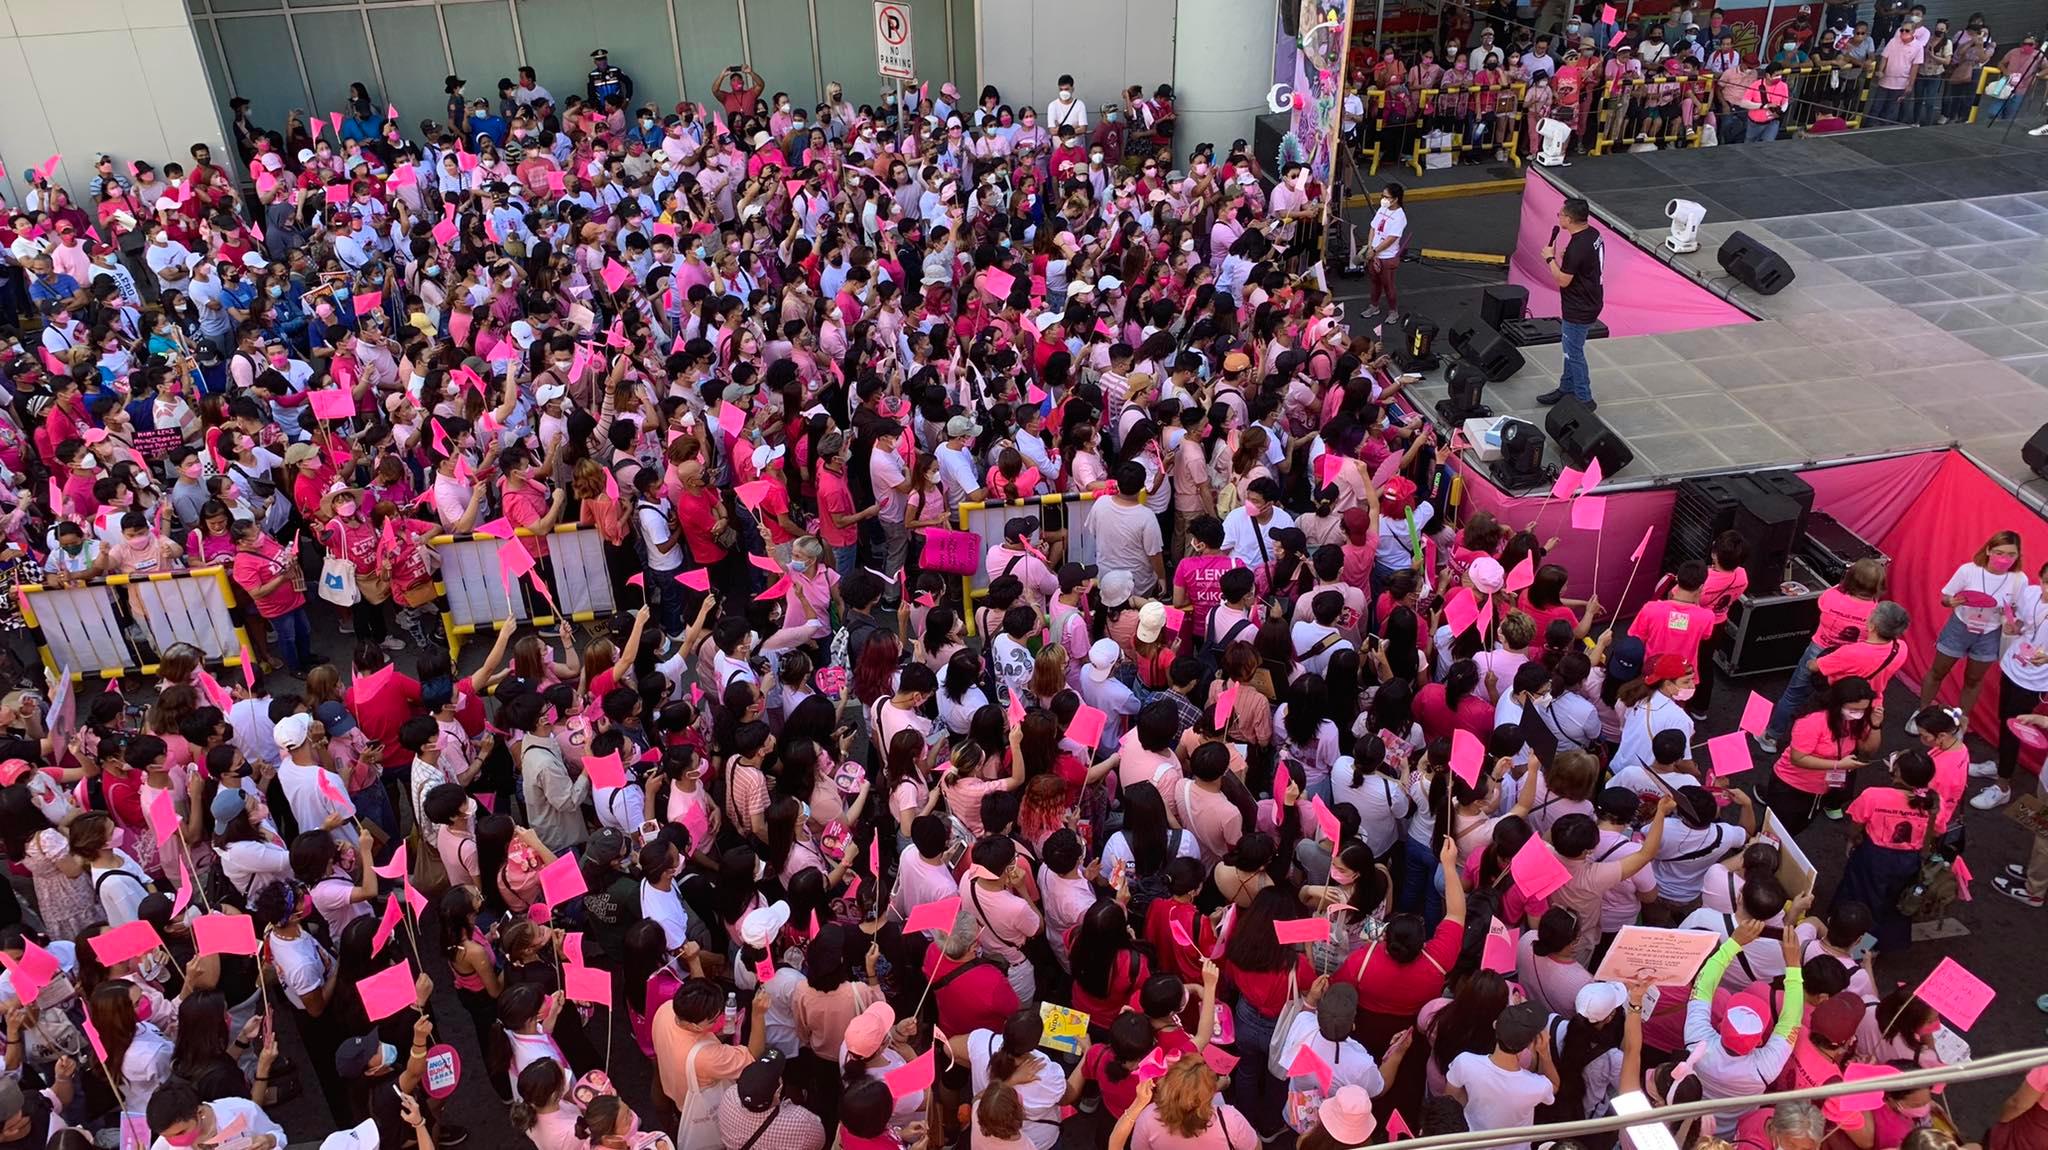 Olongapo City stages 'pink Mardi Gras' in support of VP Leni